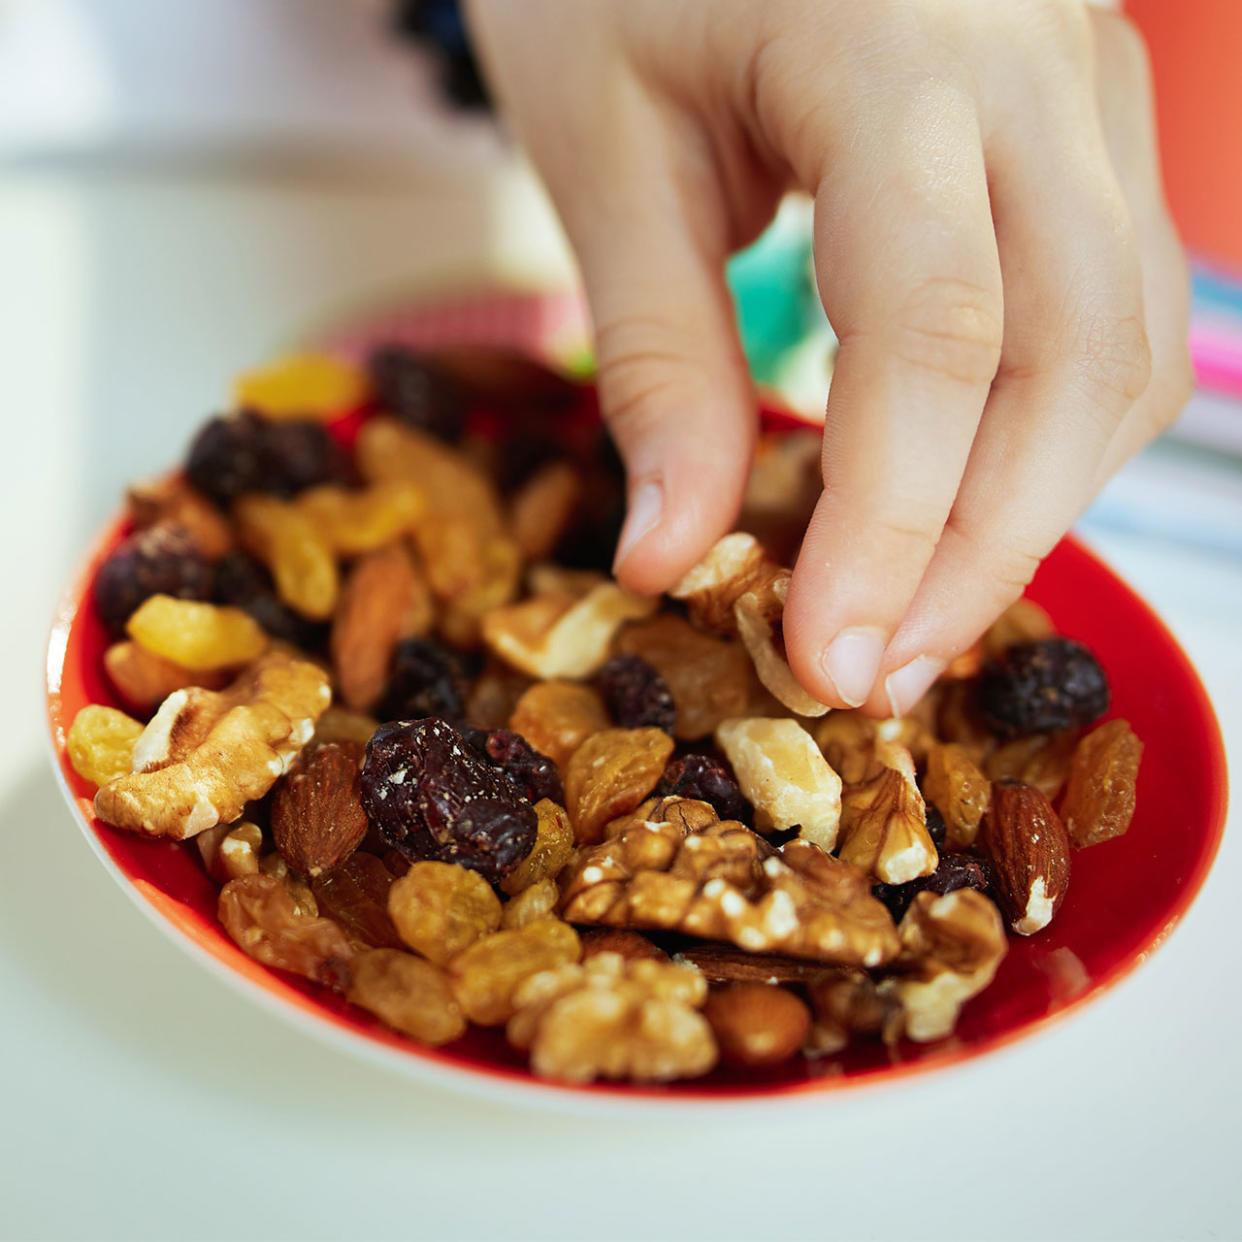 womans hand reaching for dried fruits and nuts